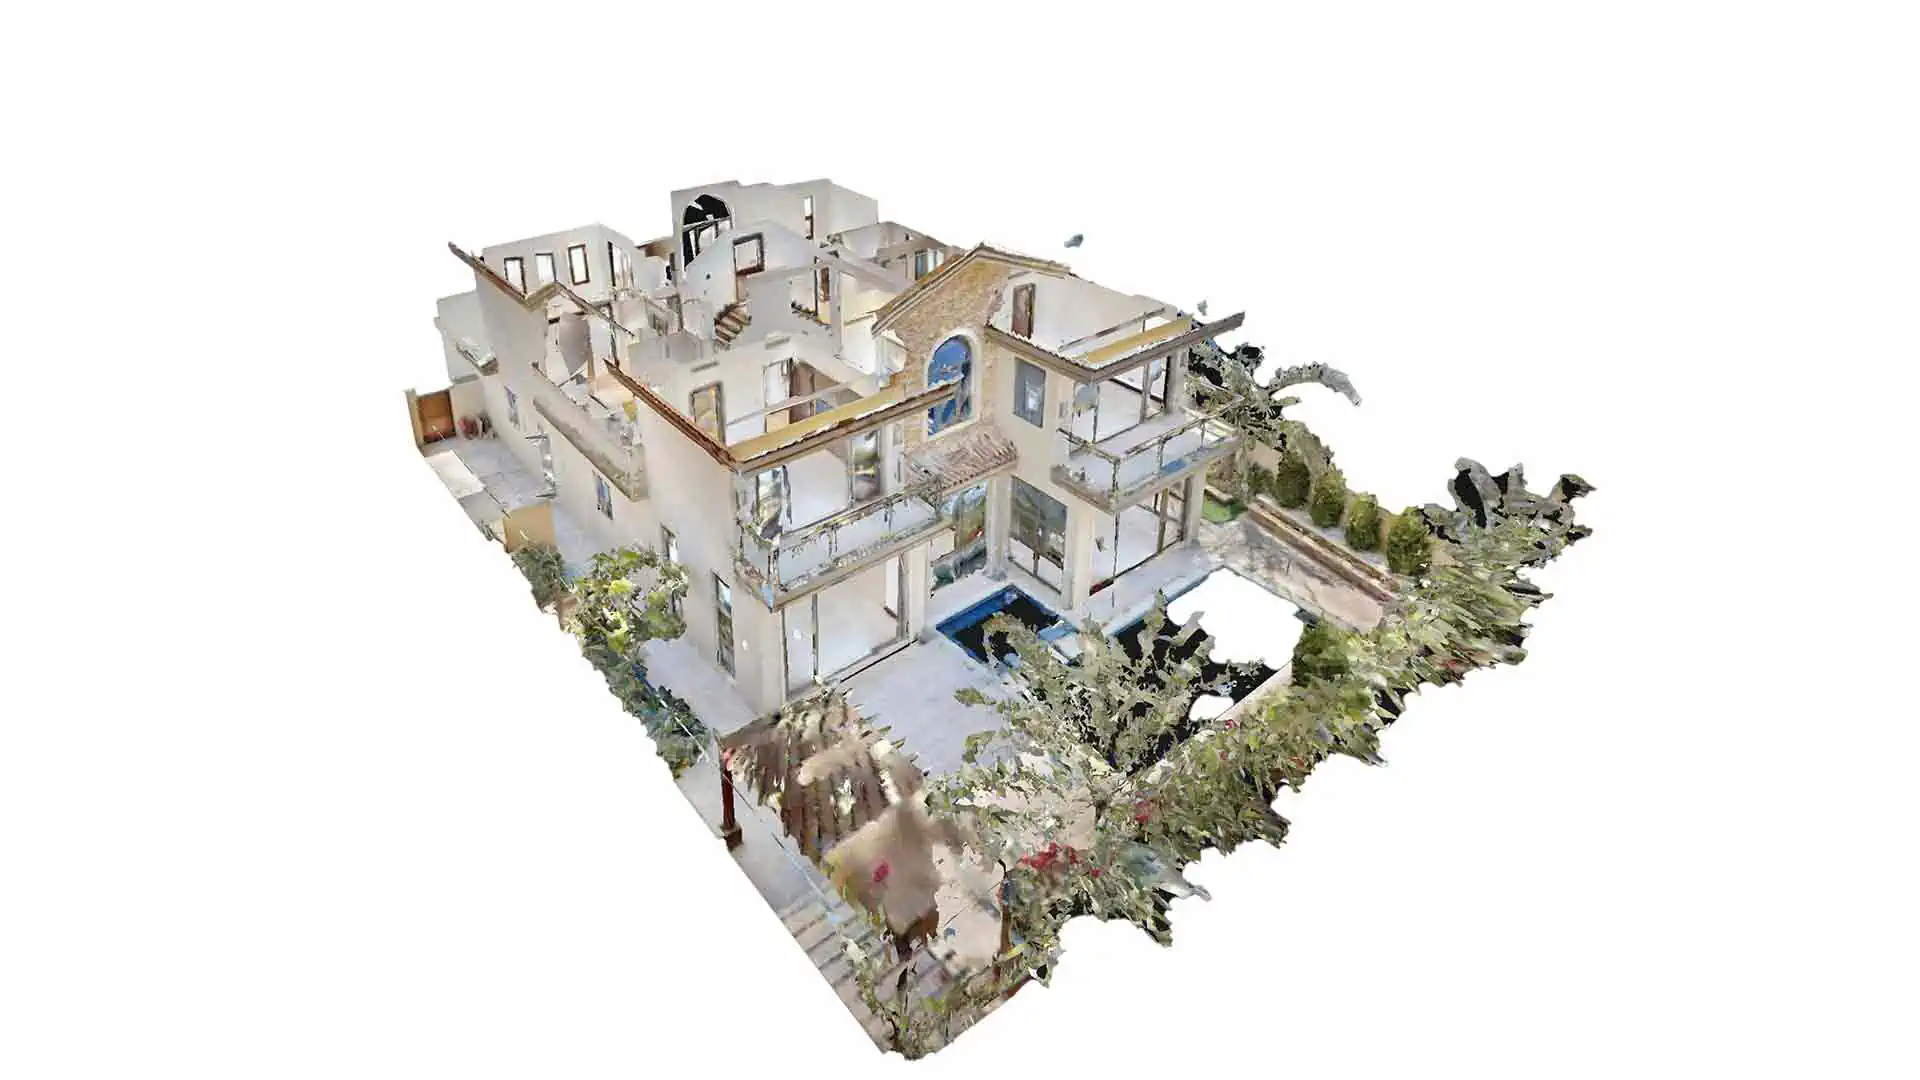 Get a bird's eye view of your dollhouse! Our 3D digital twin tech allows zooming in and out to see your space from any angle outside.